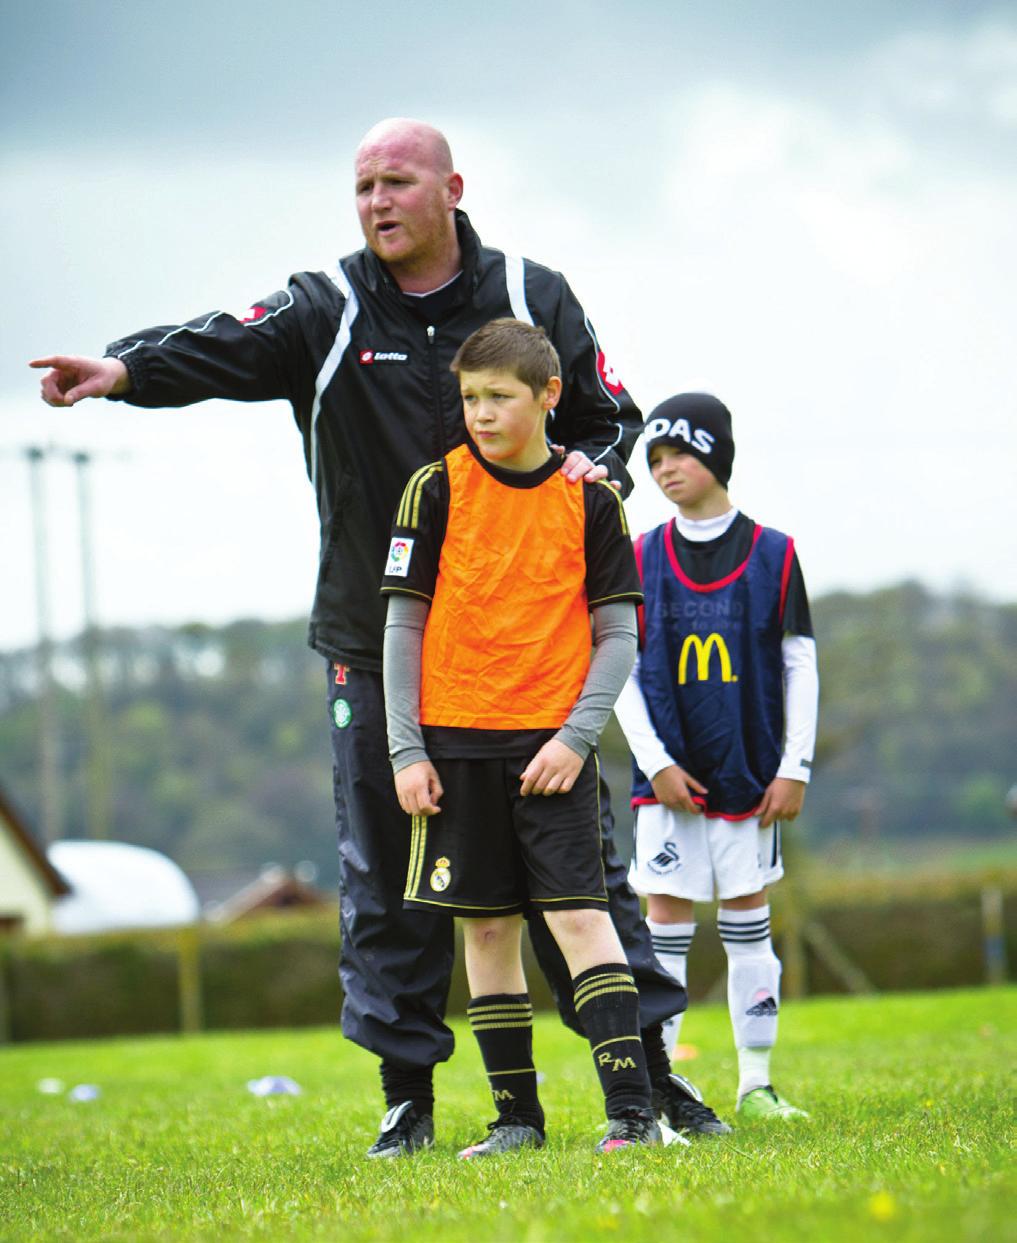 Results have seen a rise in the amount, frequency and scope of football provision targeting children and young people and the growing numbers taking part in organised football at grassroots clubs.